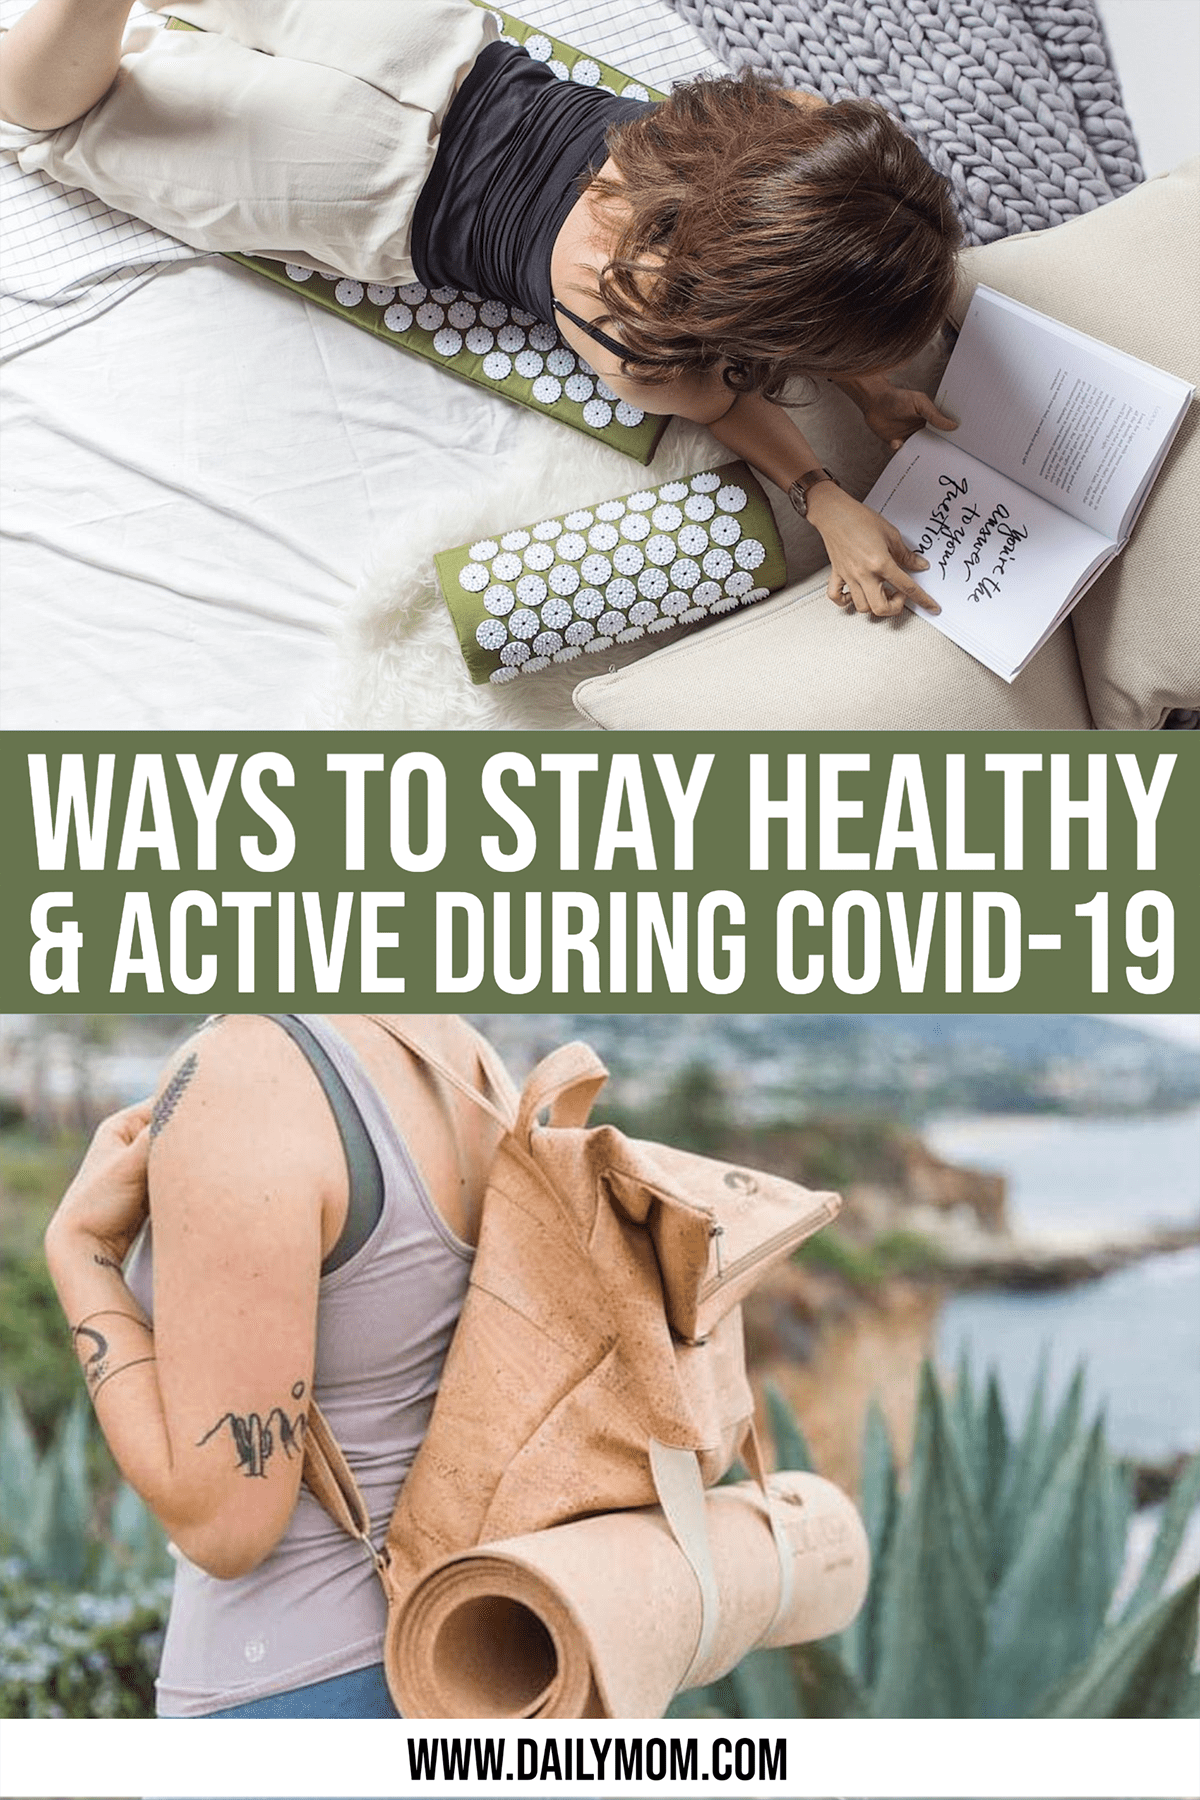 23 Ways To Stay Healthy & Active During Covid-19